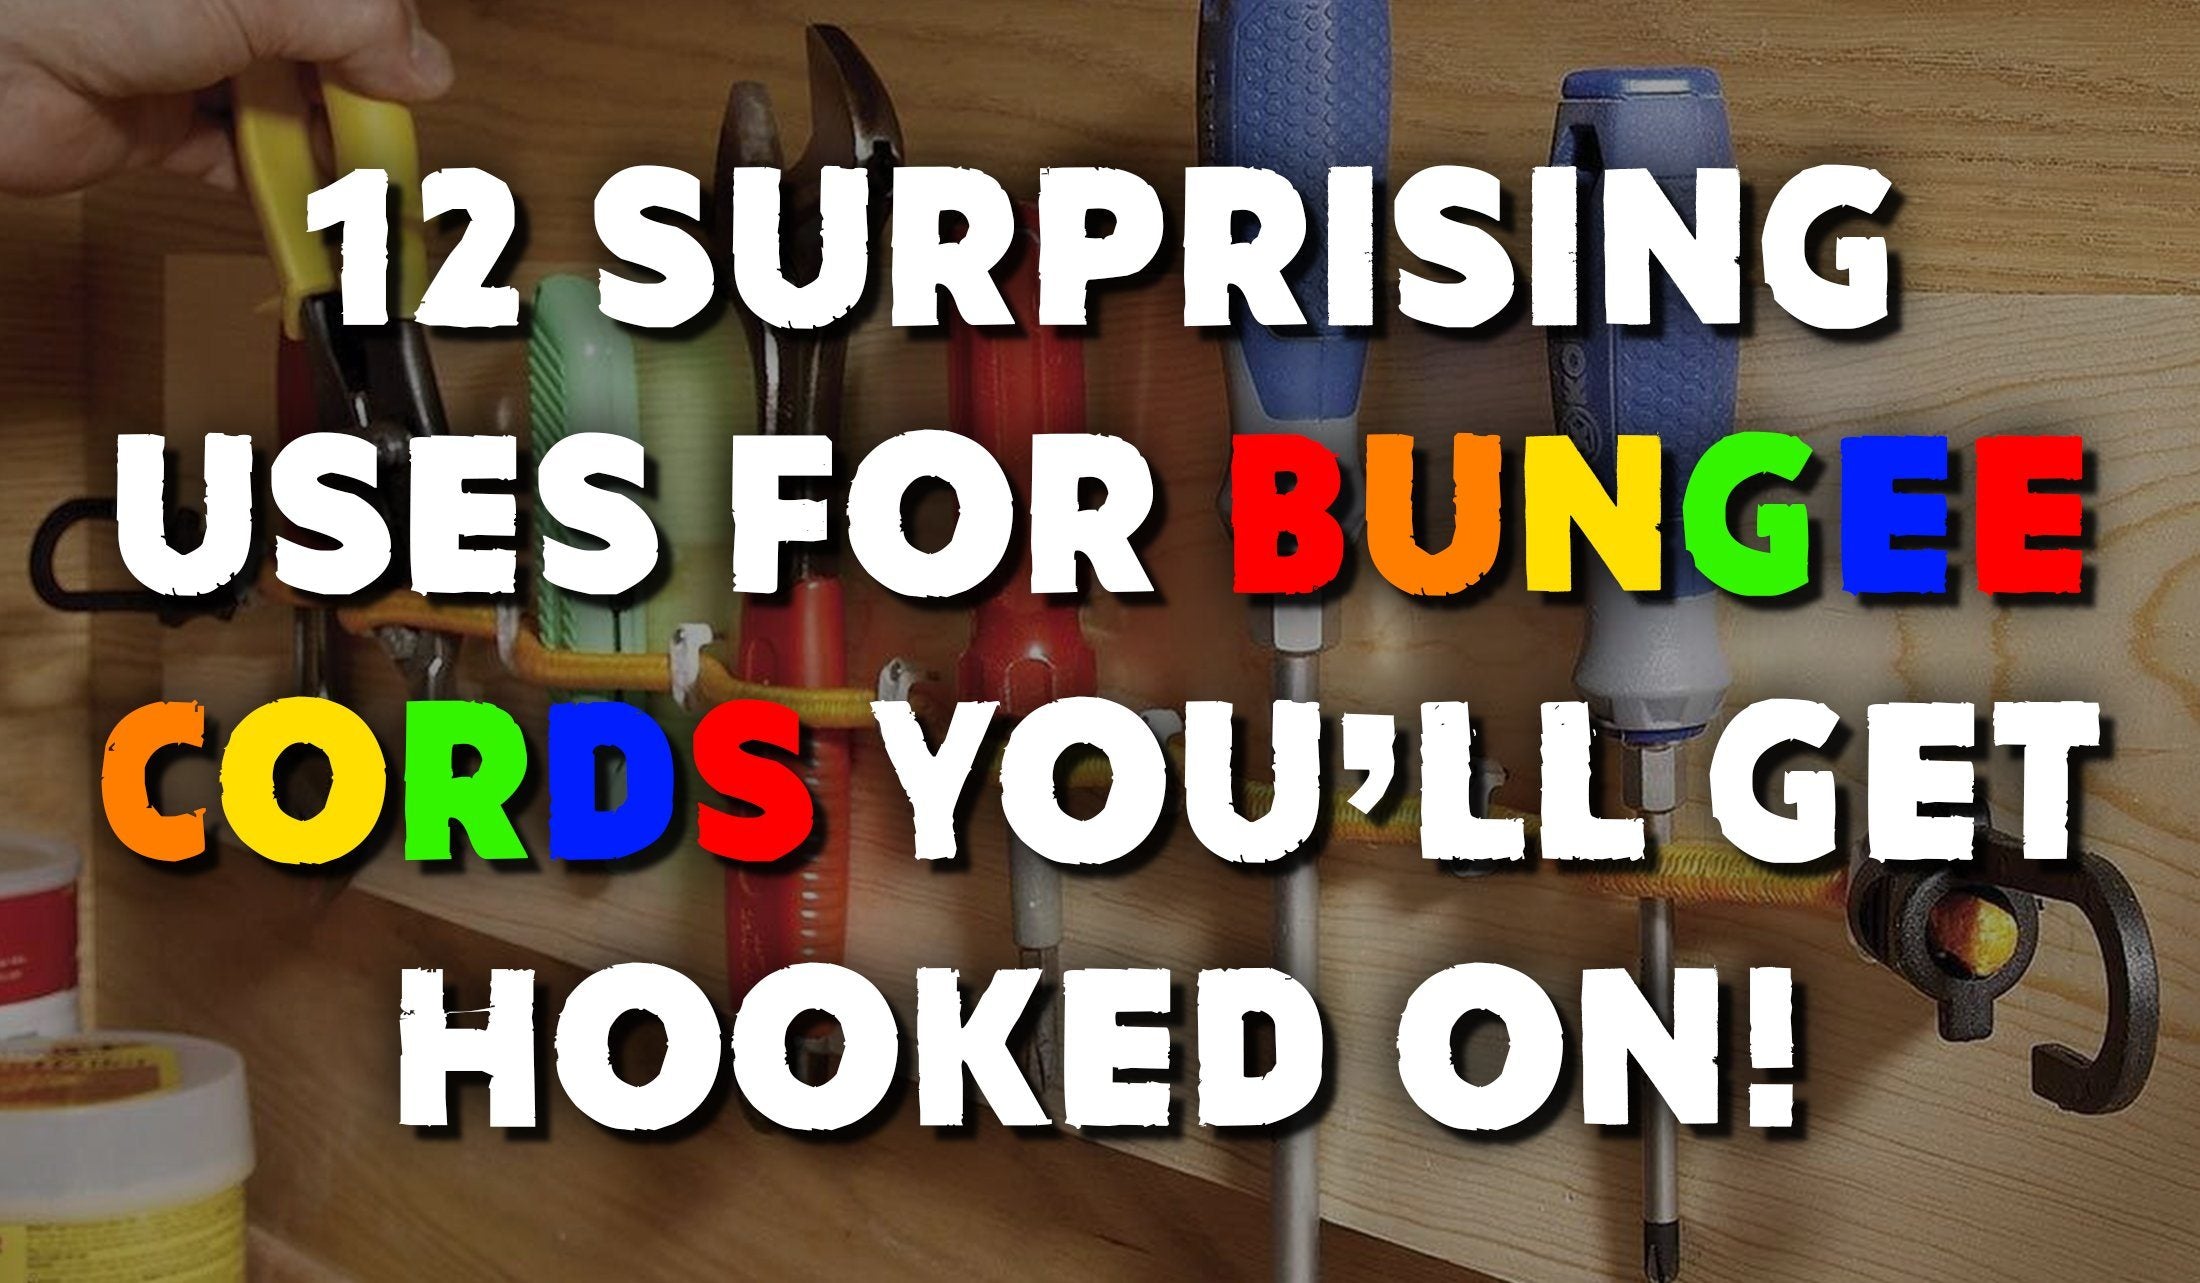 12 Surprising Uses for Bungee Cords You’ll Get Hooked On